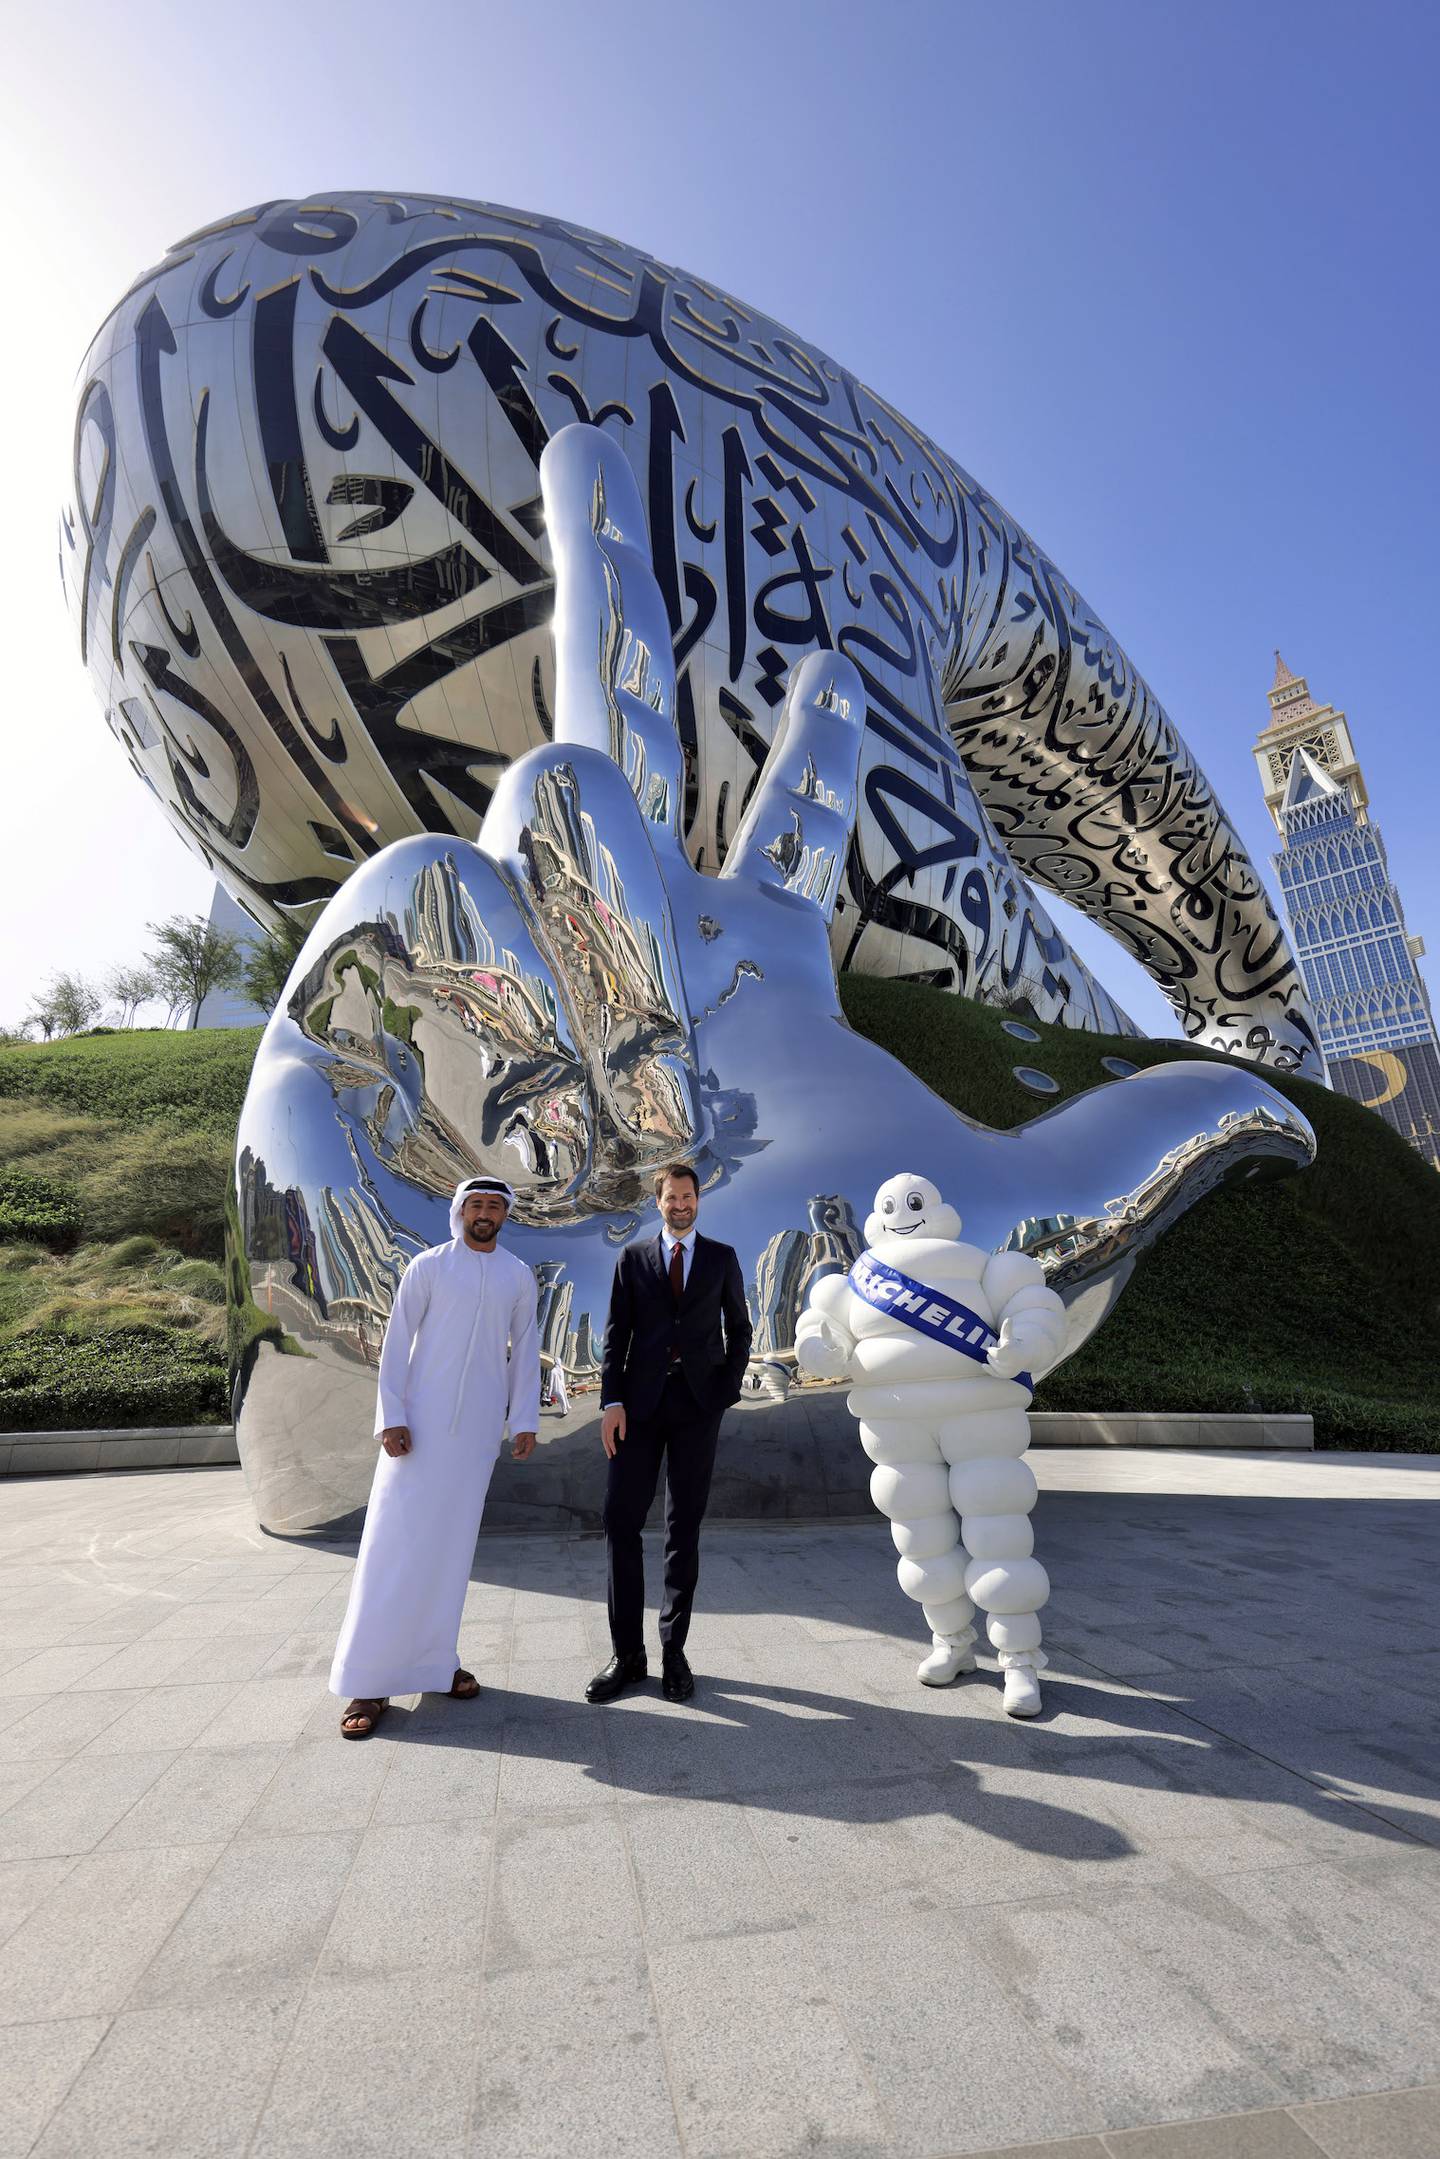 From left, Issam Kazim, chief executive of Dubai Corporation for Tourism and Commerce; Gwendal Poullennec, international director of the Michelin Guides; and Bibendum, the Michelin mascot, at the Museum of the Future, Dubai. Photo: Michelin